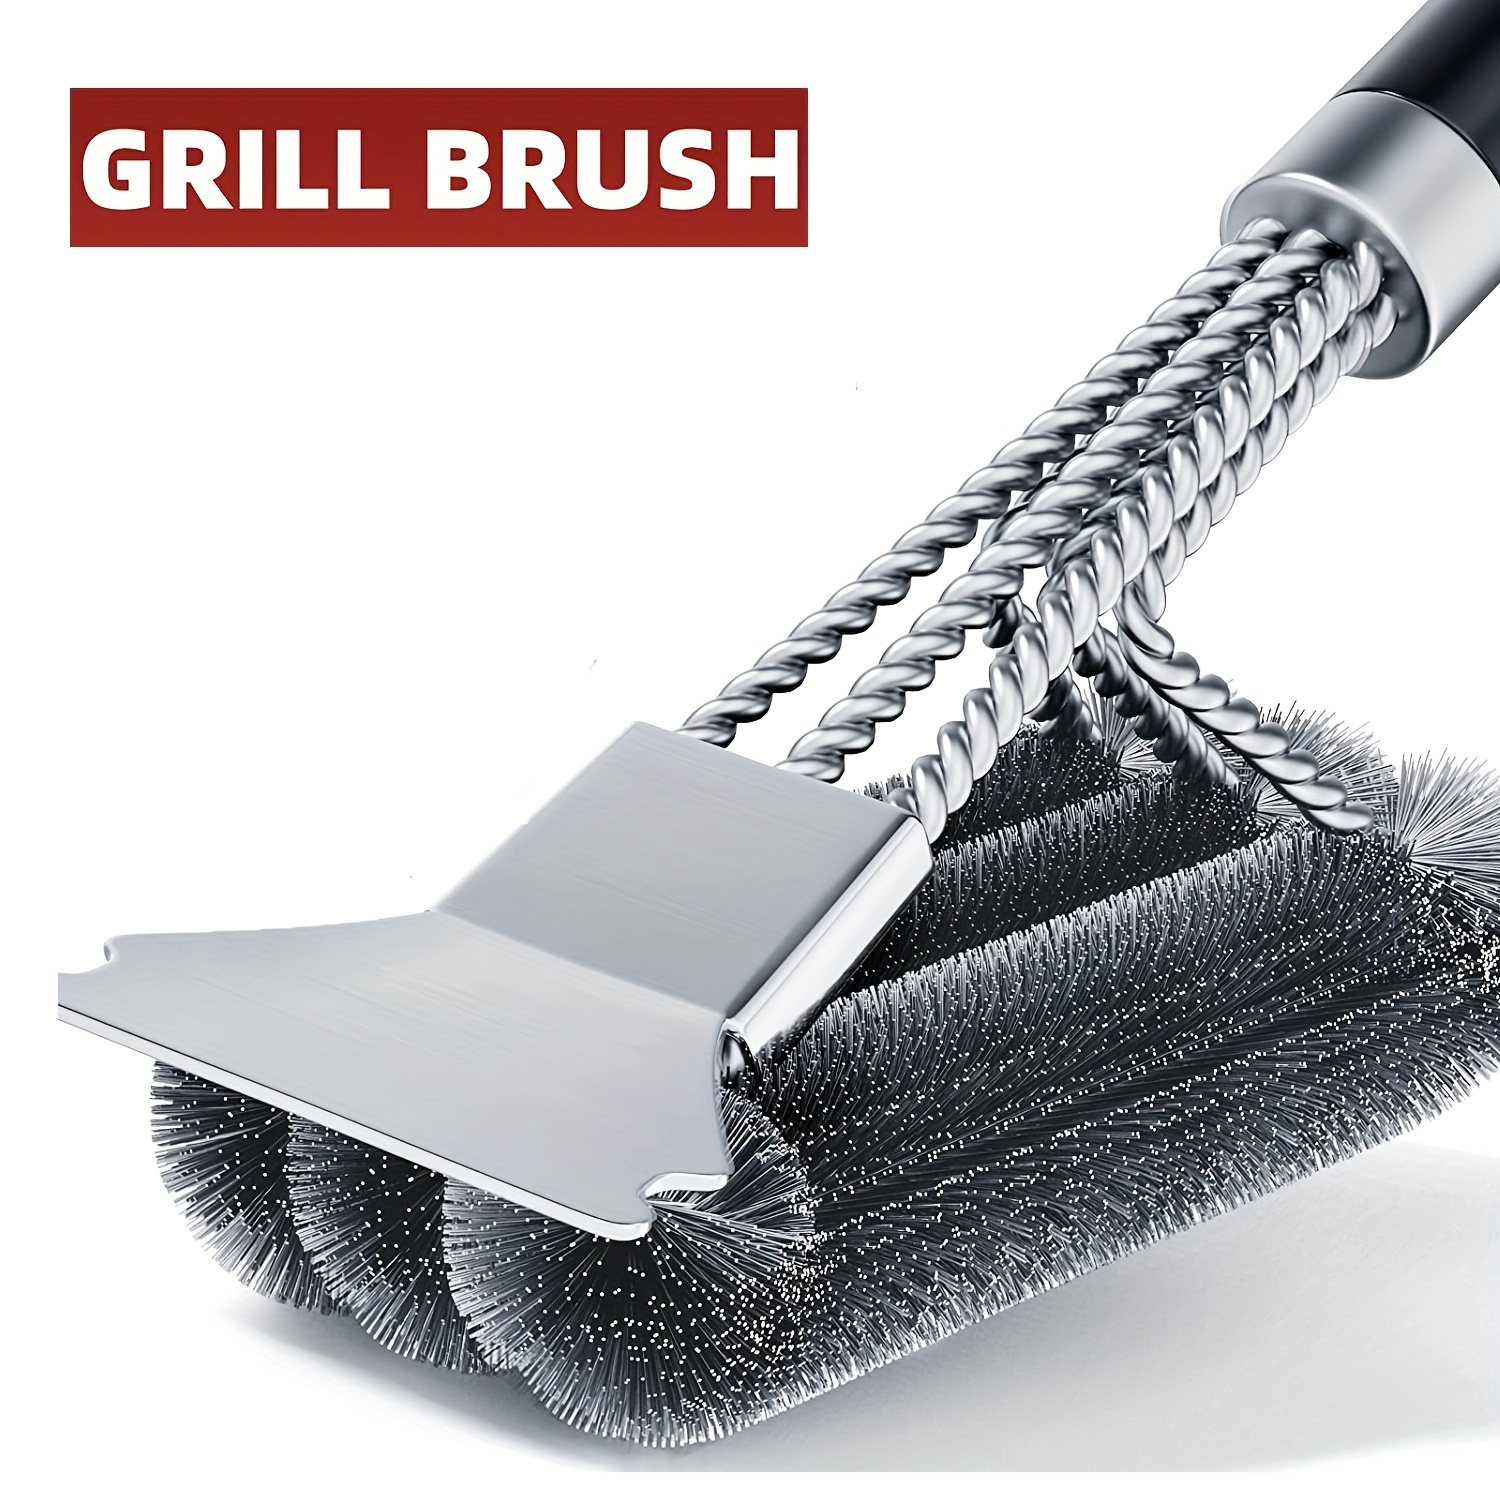 2 Set Grill Brush and Scraper Bristle Free, Safe BBQ Brush for Grill, 18'' Stainless Grill Grate Cleaner for Porcelain, Cast Iron, Stainless Steel